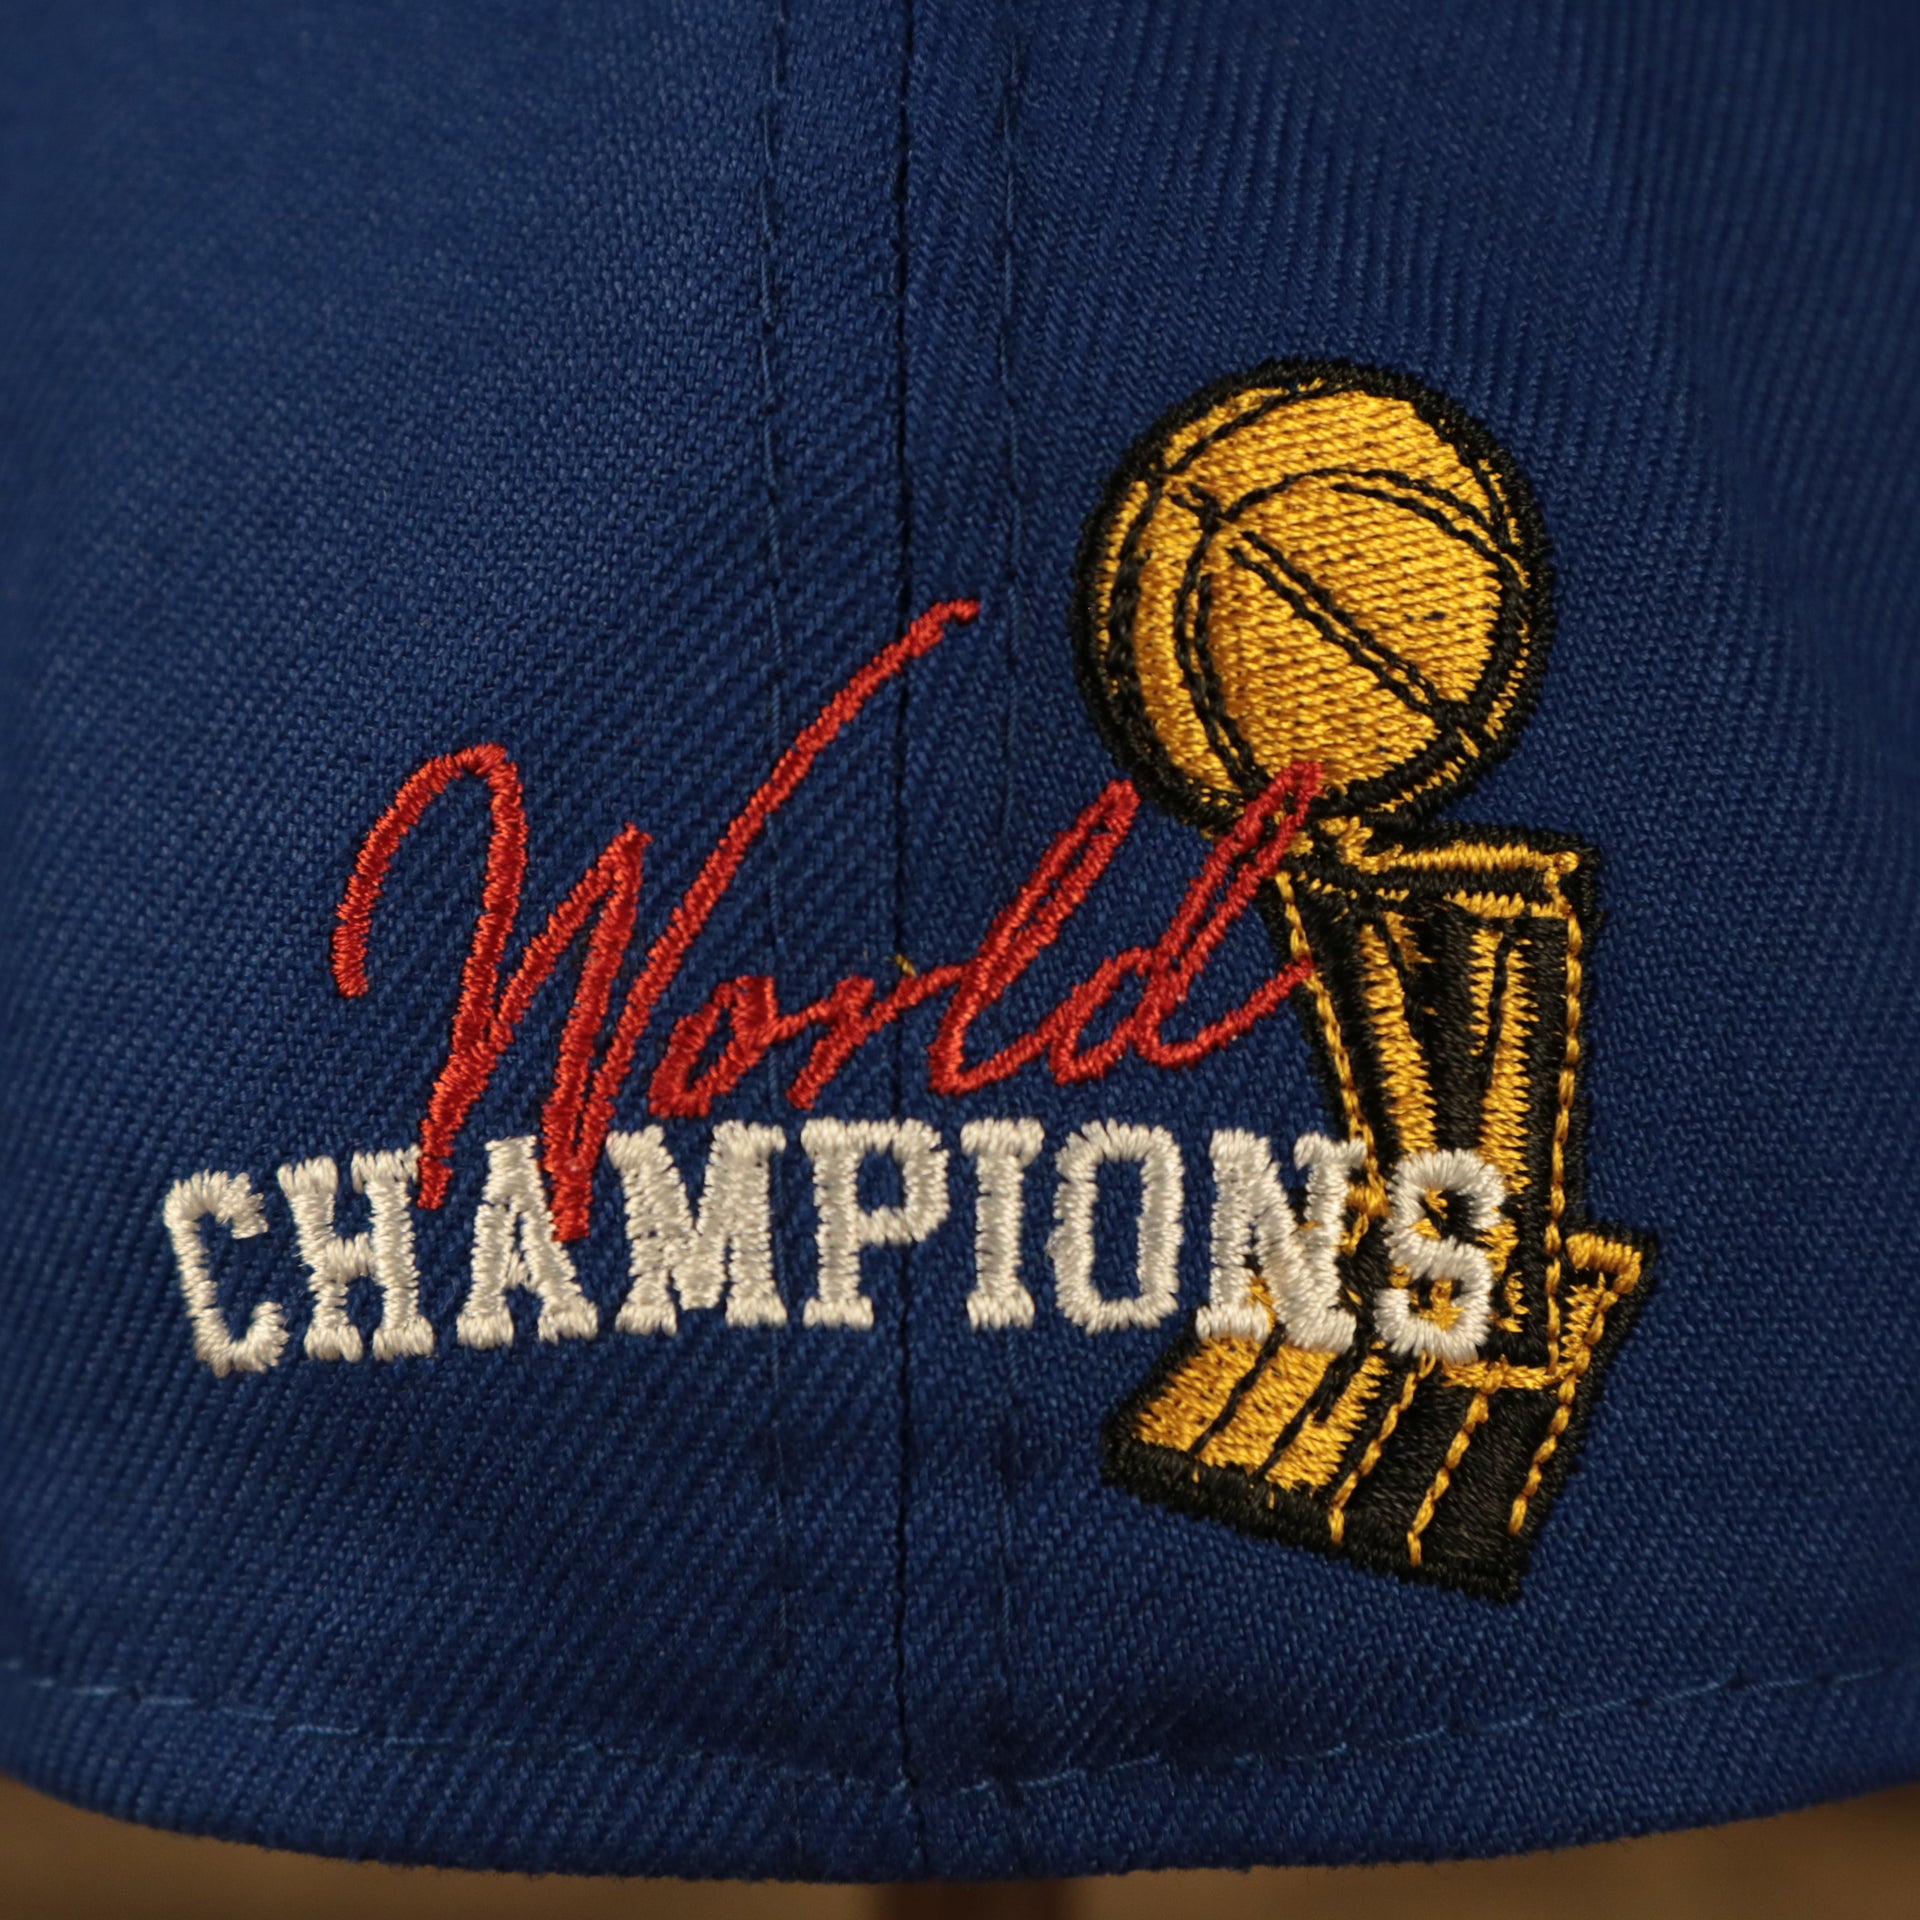 world champions logo shot Philadelphia 76ers "Championship Rings" All Over Side Patch Gray Bottom 59FIFTY Fitted Cap